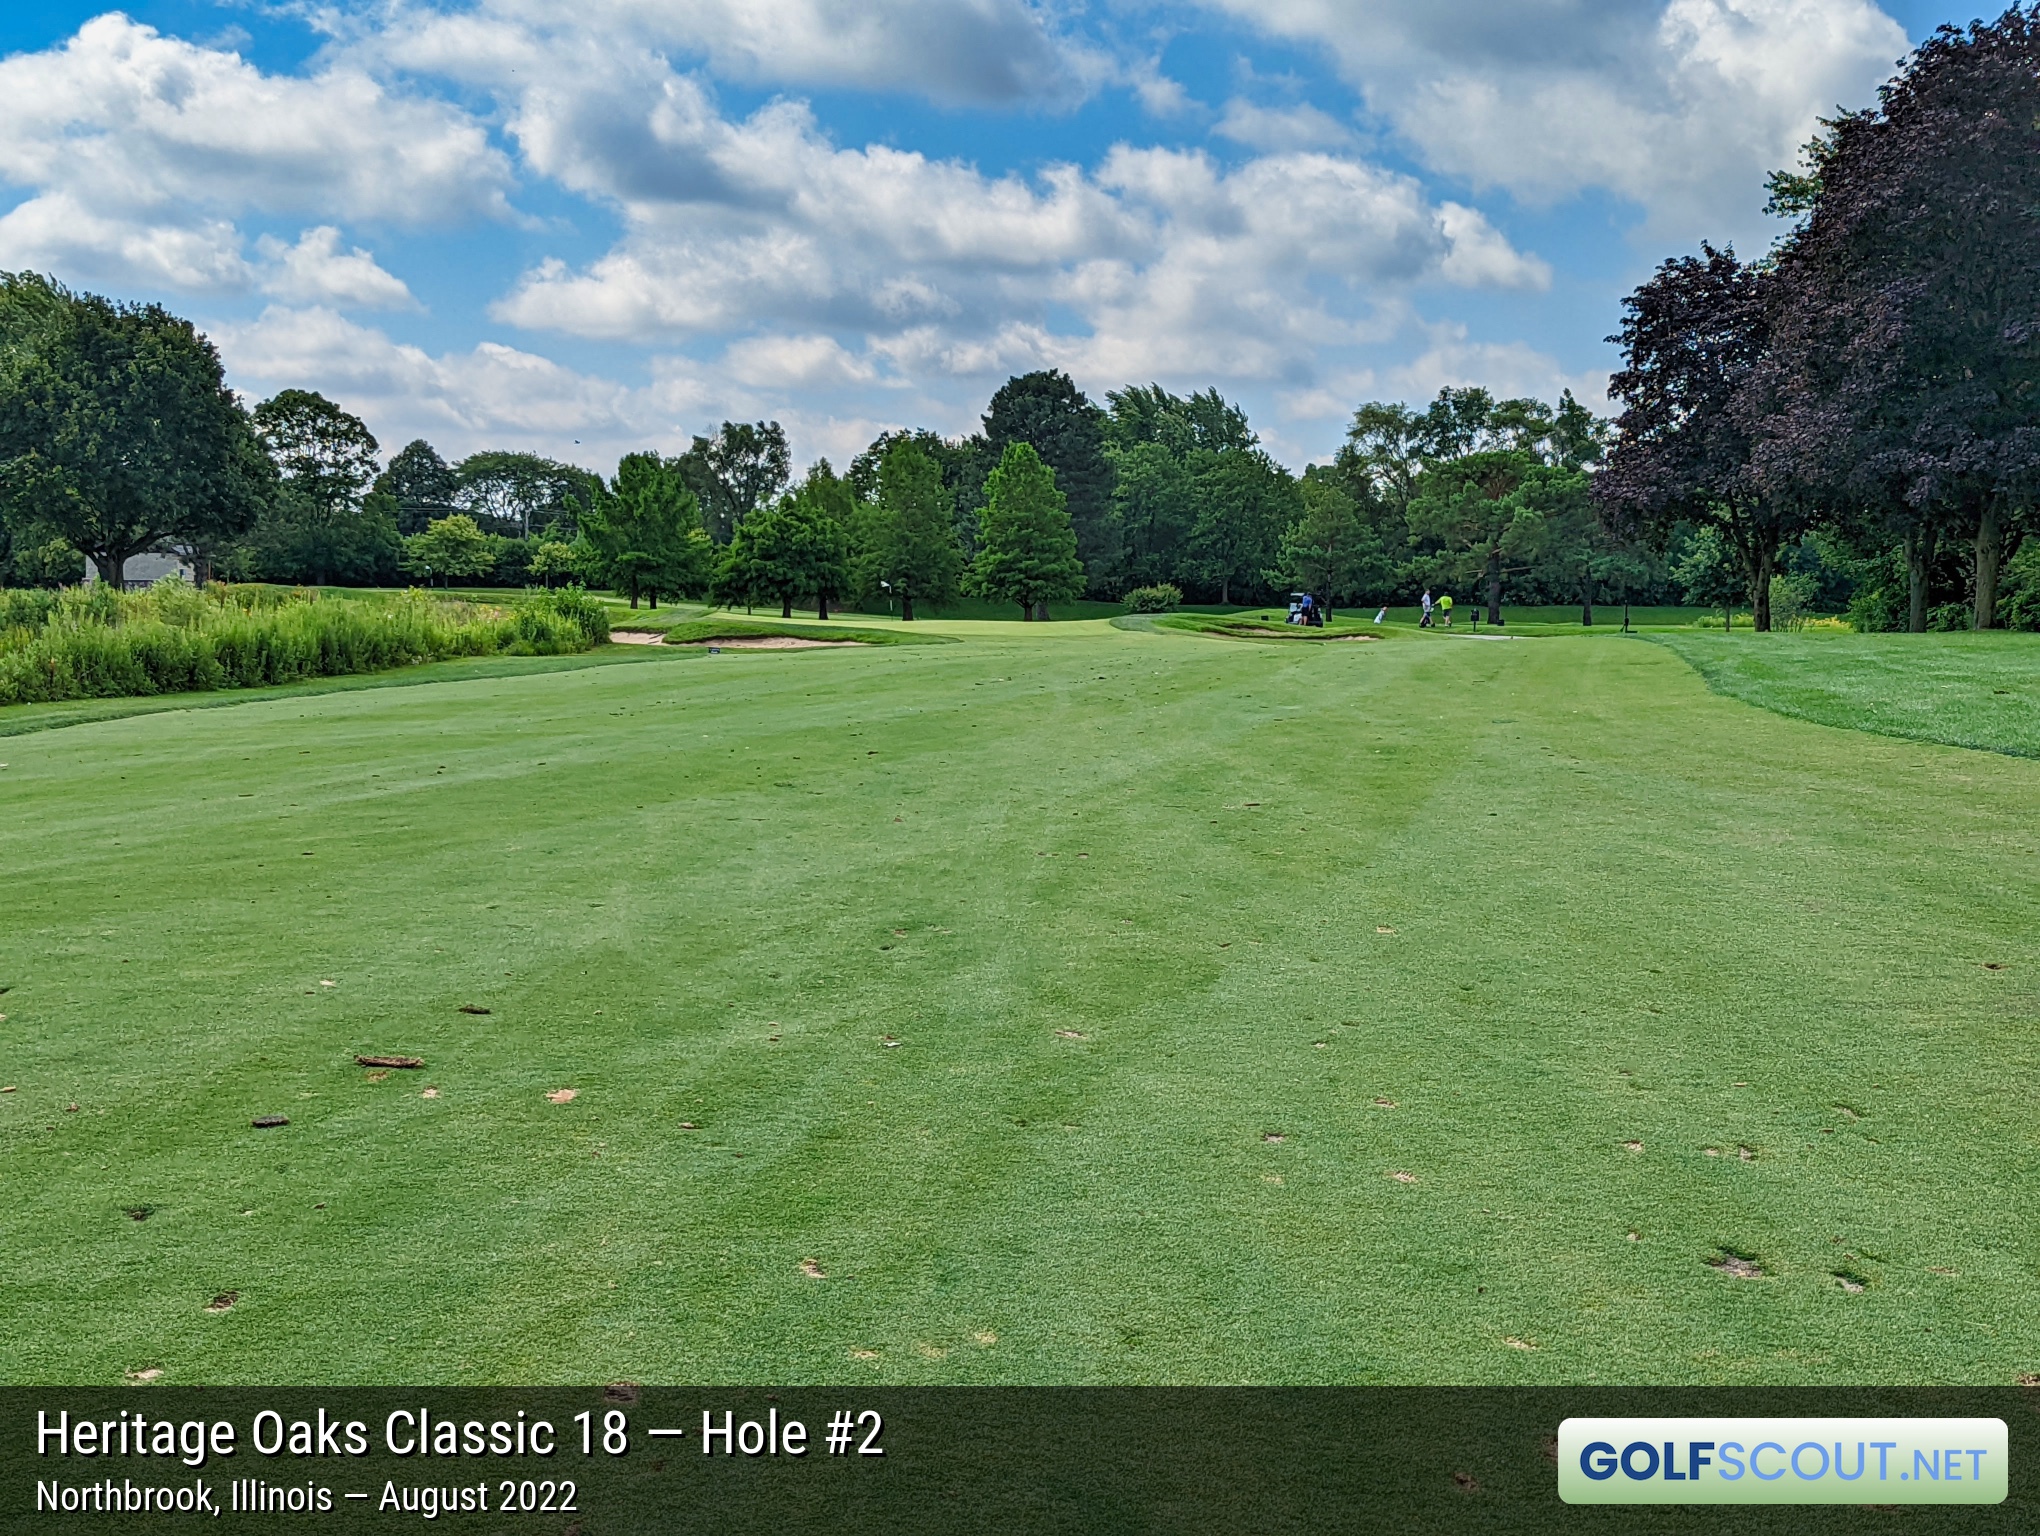 Photo of hole #2 at Heritage Oaks Golf Club - Classic 18 in Northbrook, Illinois. 